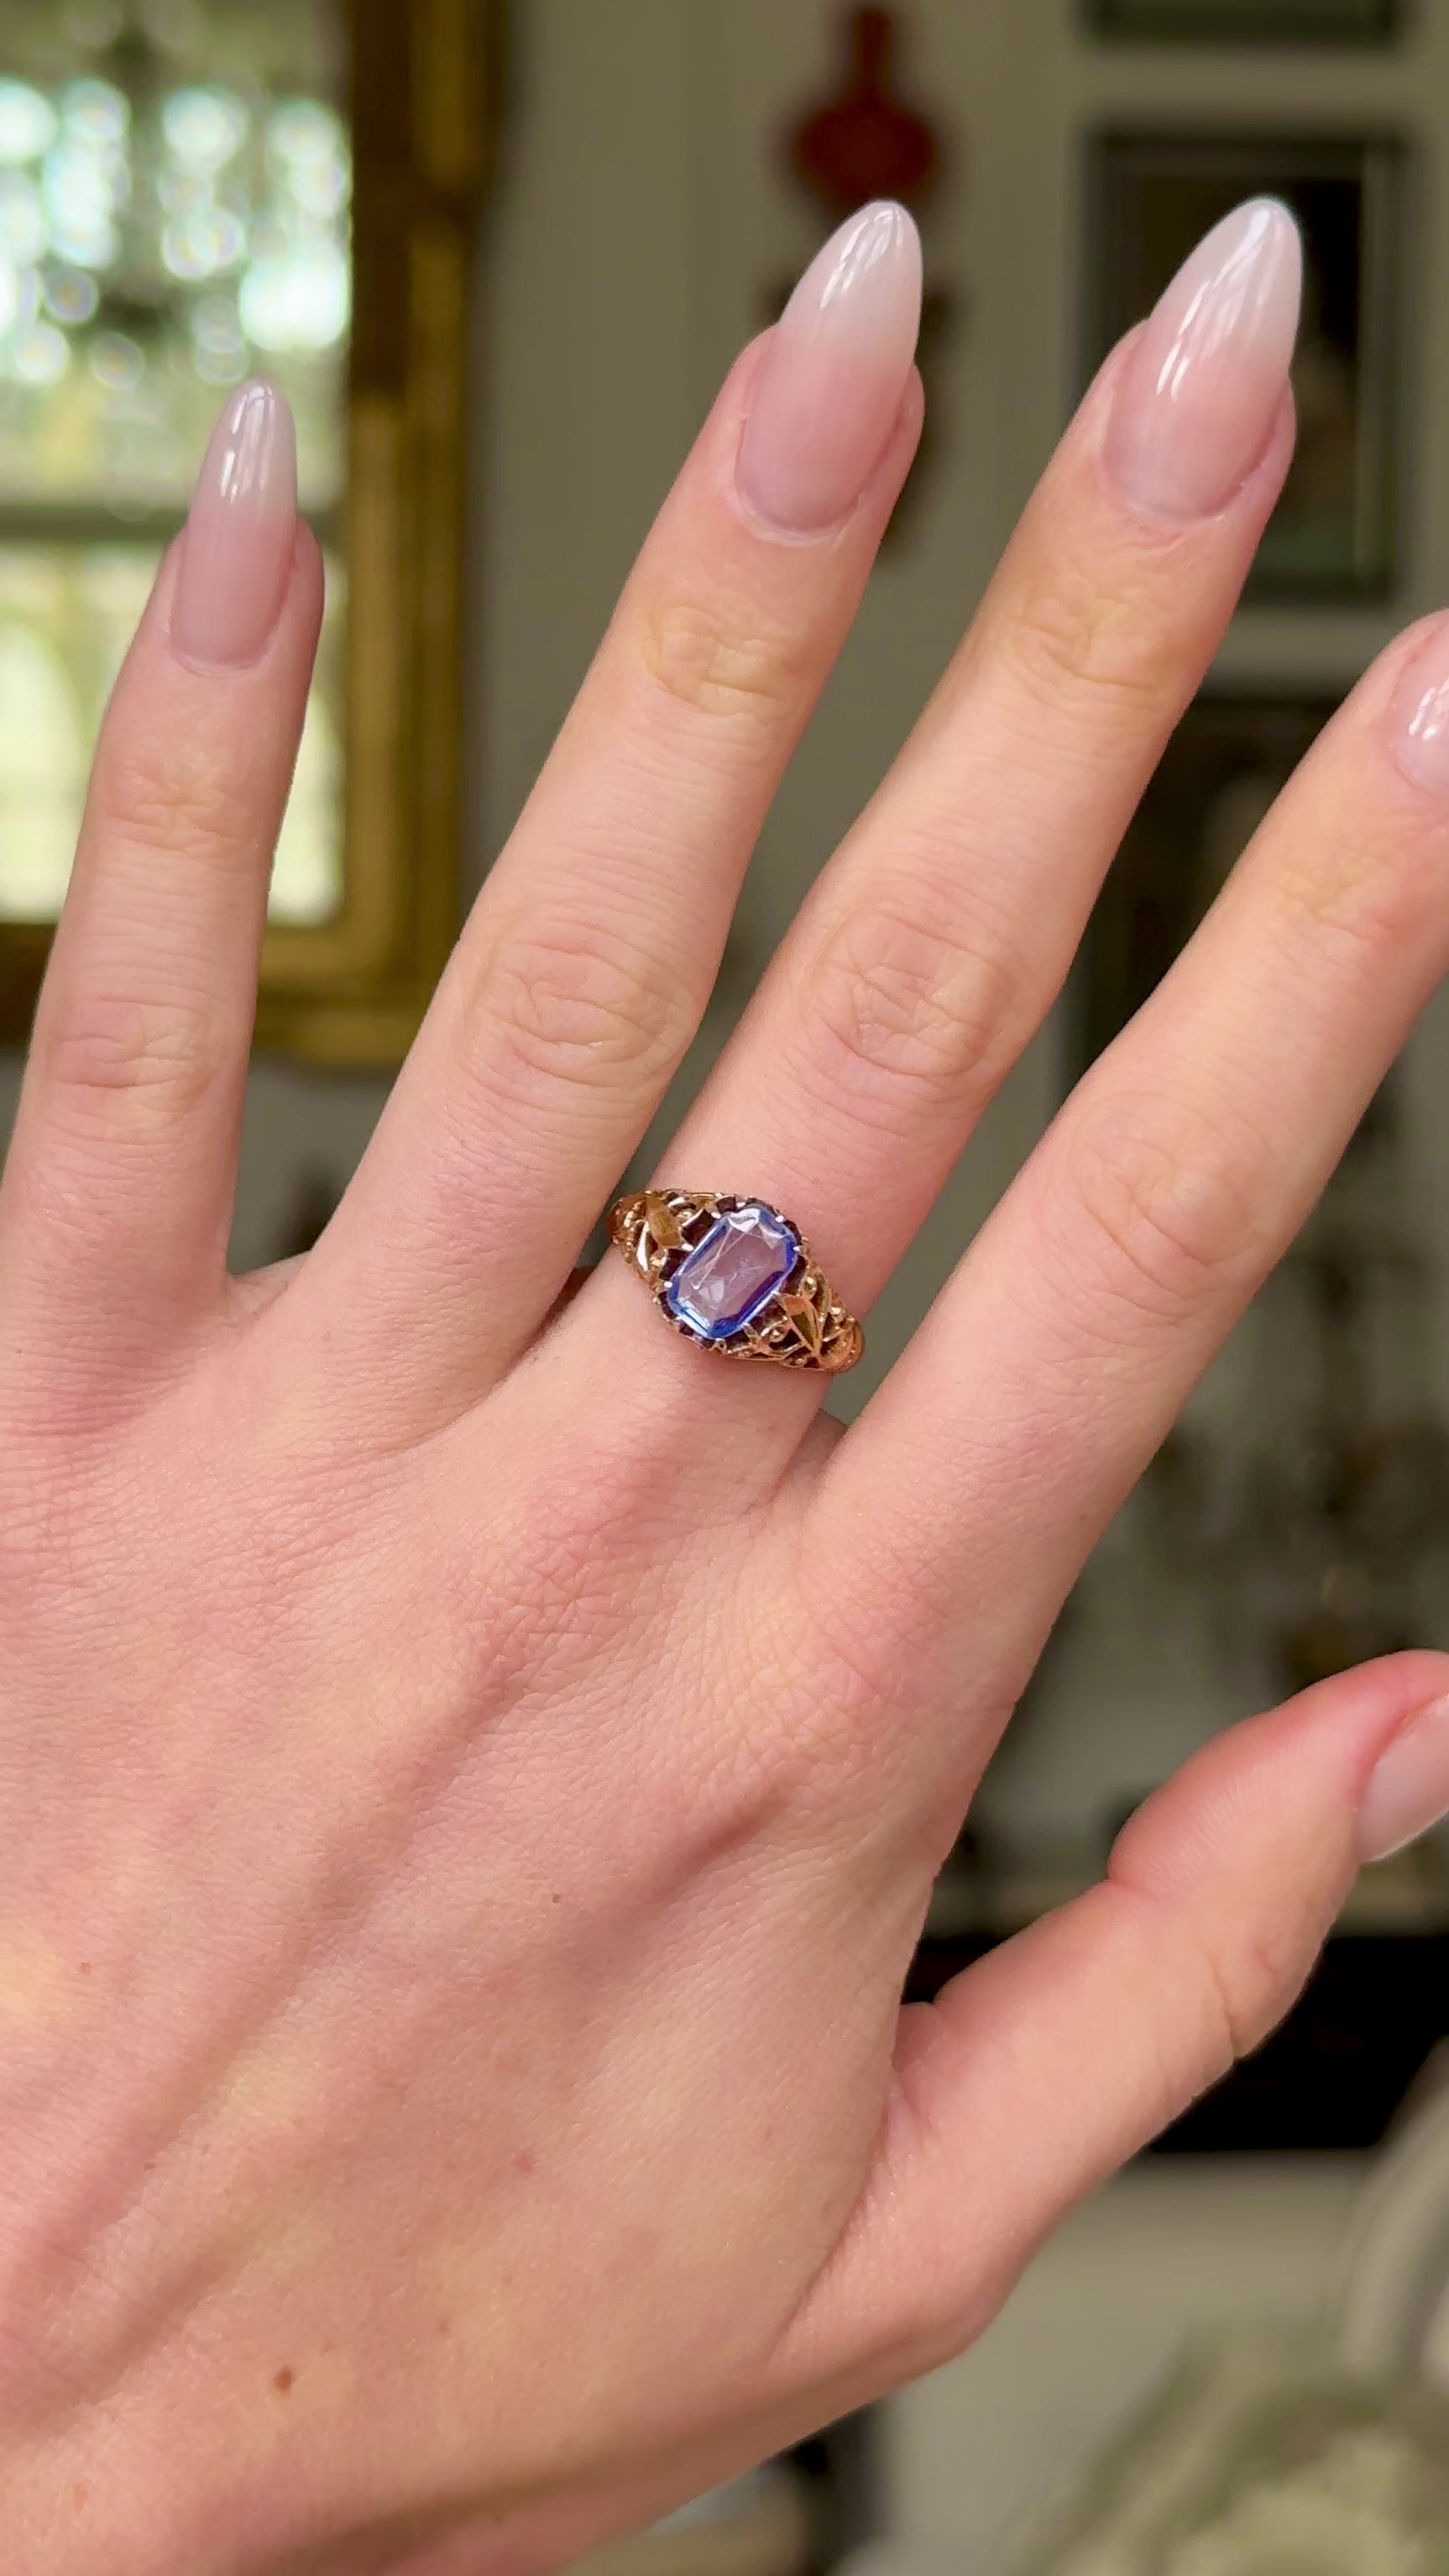 Antique, Victorian Ceylon Sapphire Ring, worn on hand and moved around to give perspective.